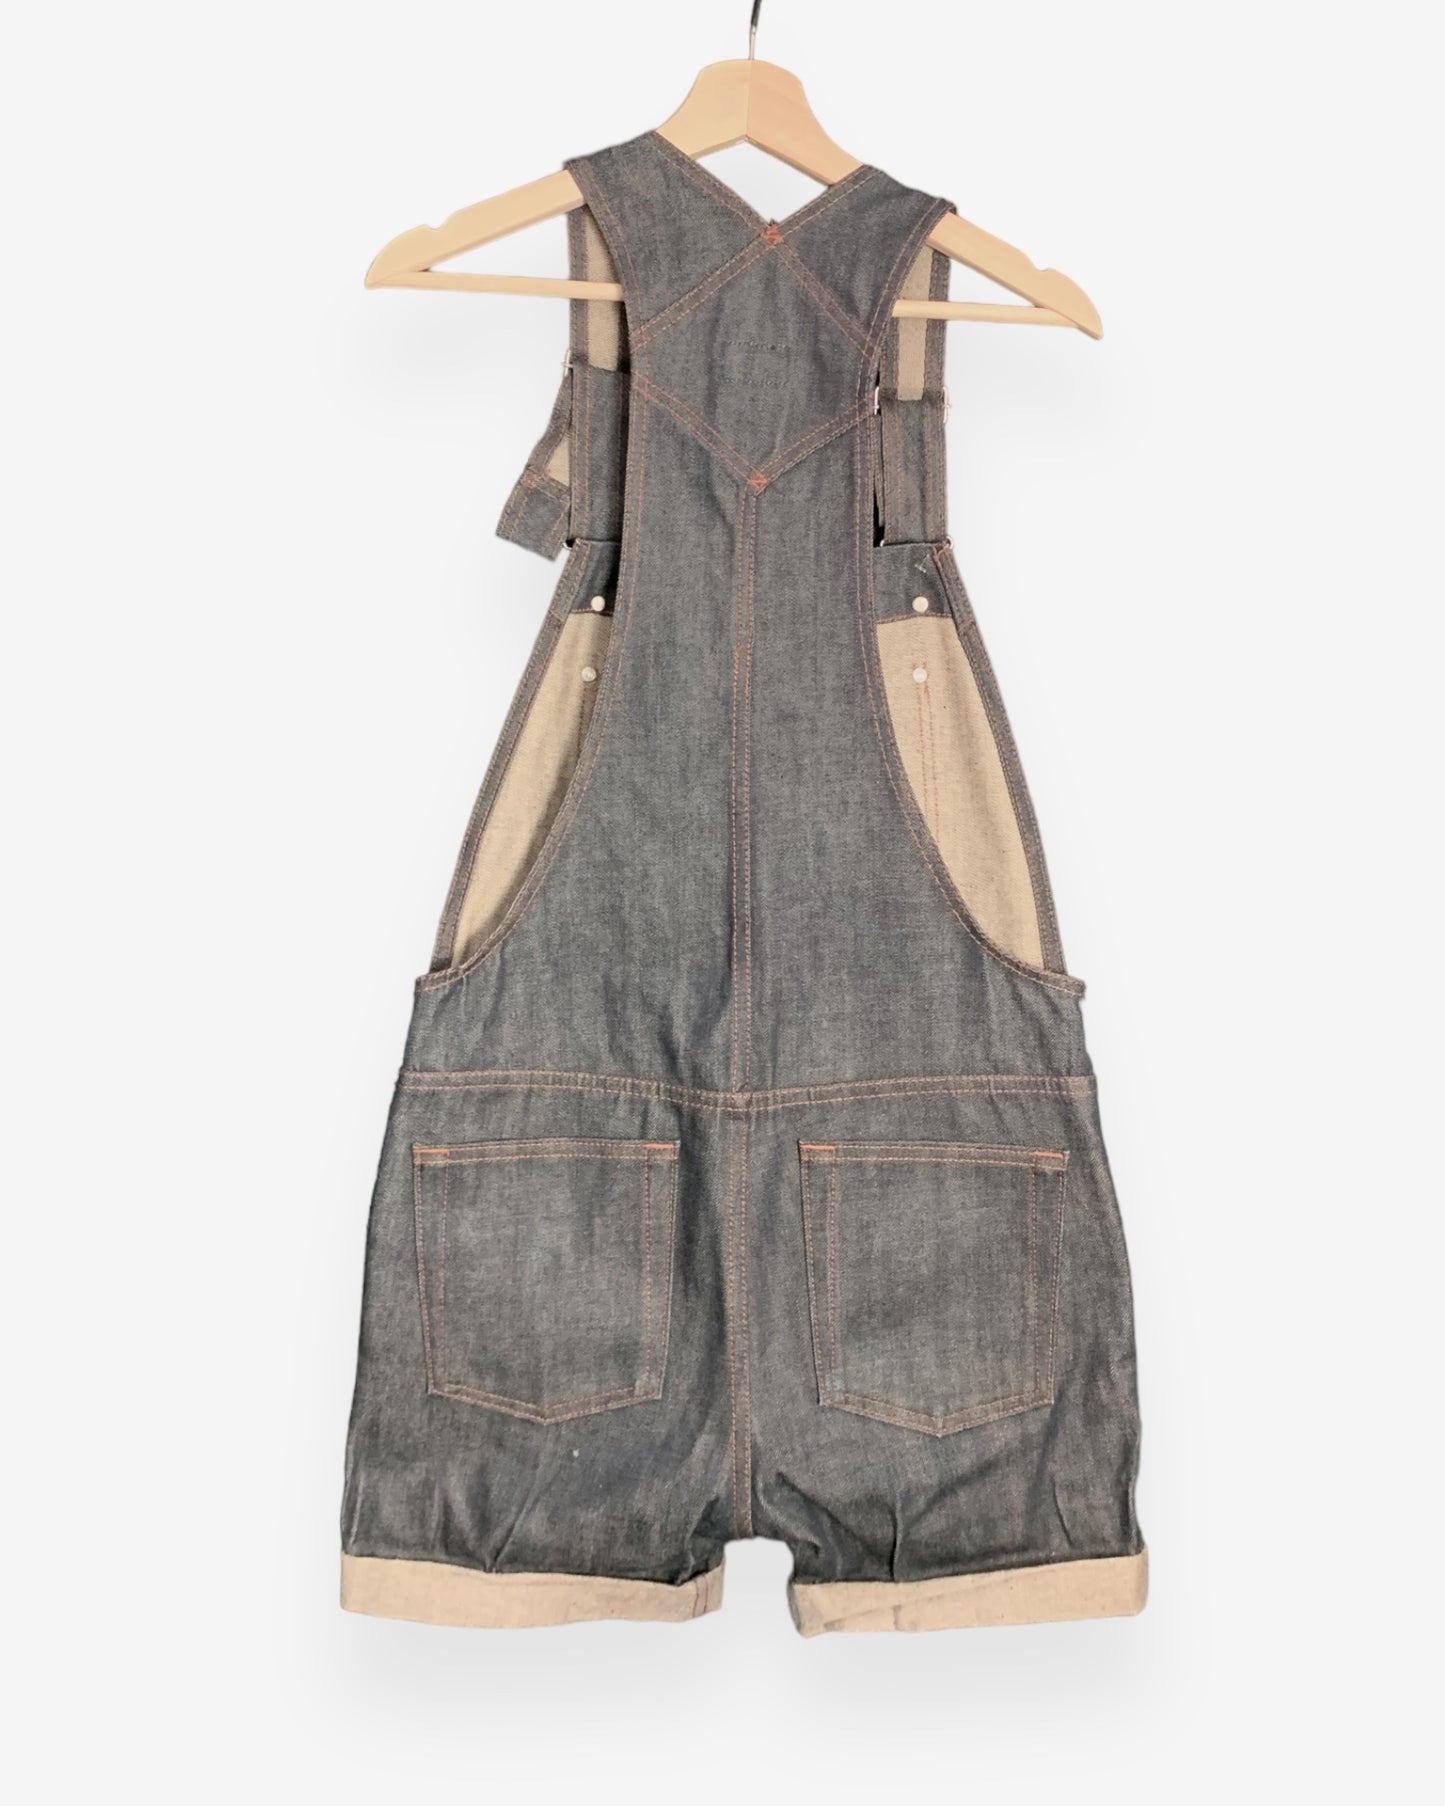 Naked and Famous denim short dungarees